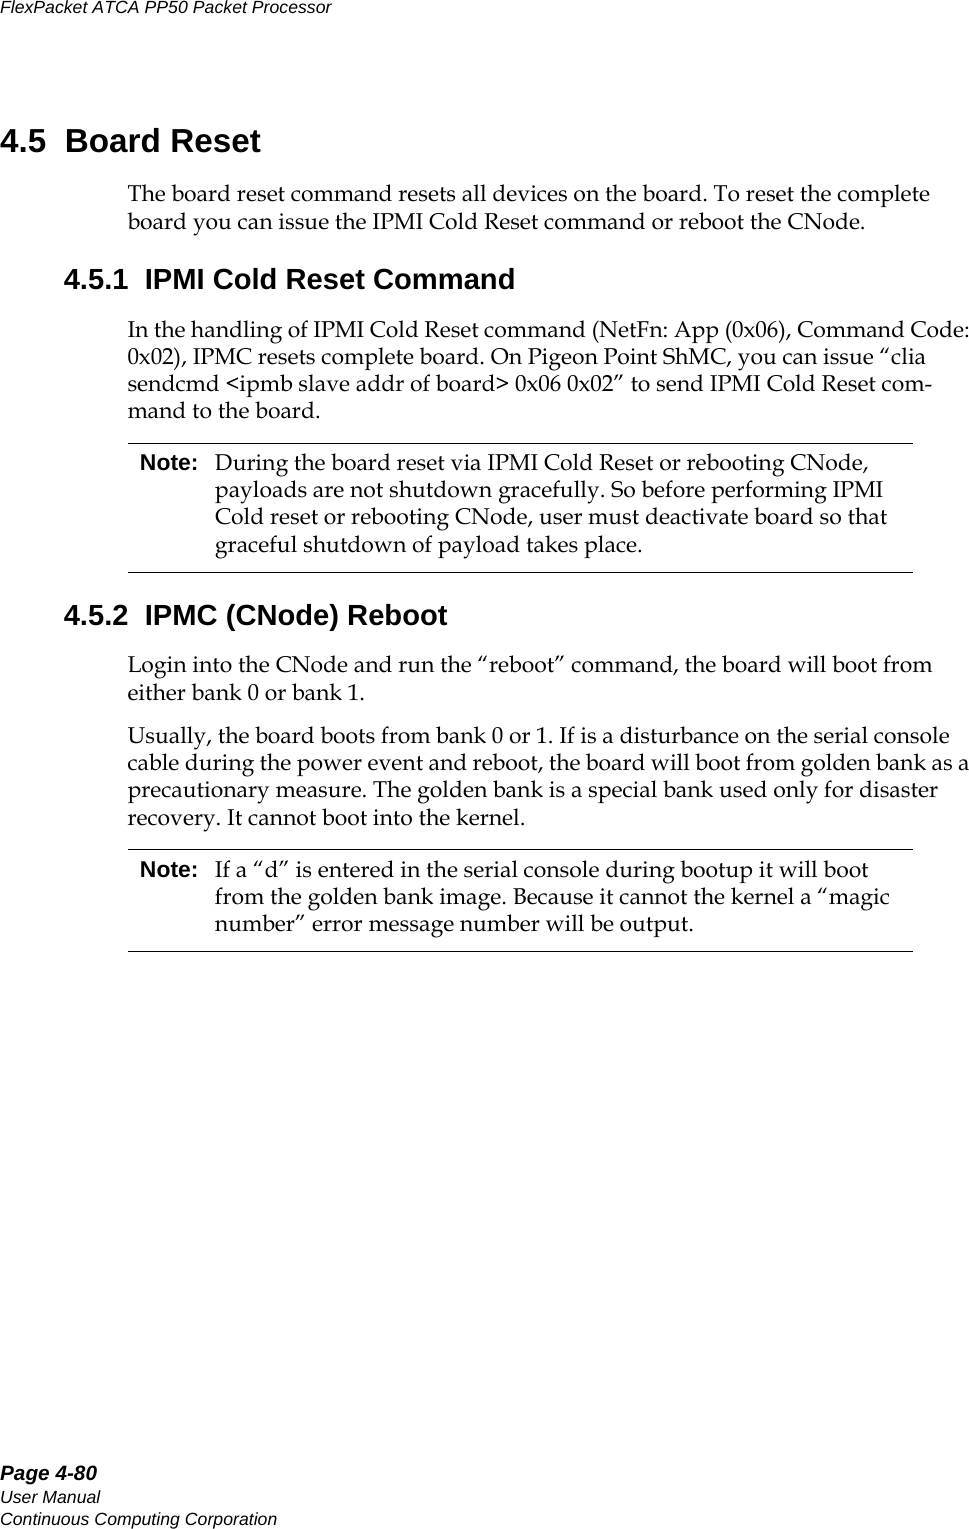 Page 4-80User ManualContinuous Computing CorporationFlexPacket ATCA PP50 Packet Processor     Preliminary4.5  Board ResetThe board reset command resets all devices on the board. To reset the complete board you can issue the IPMI Cold Reset command or reboot the CNode.4.5.1  IPMI Cold Reset CommandIn the handling of IPMI Cold Reset command (NetFn: App (0x06), Command Code: 0x02), IPMC resets complete board. On Pigeon Point ShMC, you can issue “clia sendcmd &lt;ipmb slave addr of board&gt; 0x06 0x02” to send IPMI Cold Reset com-mand to the board. 4.5.2  IPMC (CNode) RebootLogin into the CNode and run the “reboot” command, the board will boot from either bank 0 or bank 1.Usually, the board boots from bank 0 or 1. If is a disturbance on the serial console cable during the power event and reboot, the board will boot from golden bank as a precautionary measure. The golden bank is a special bank used only for disaster recovery. It cannot boot into the kernel.Note: During the board reset via IPMI Cold Reset or rebooting CNode, payloads are not shutdown gracefully. So before performing IPMI Cold reset or rebooting CNode, user must deactivate board so that graceful shutdown of payload takes place.Note: If a “d” is entered in the serial console during bootup it will boot from the golden bank image. Because it cannot the kernel a “magic number” error message number will be output.